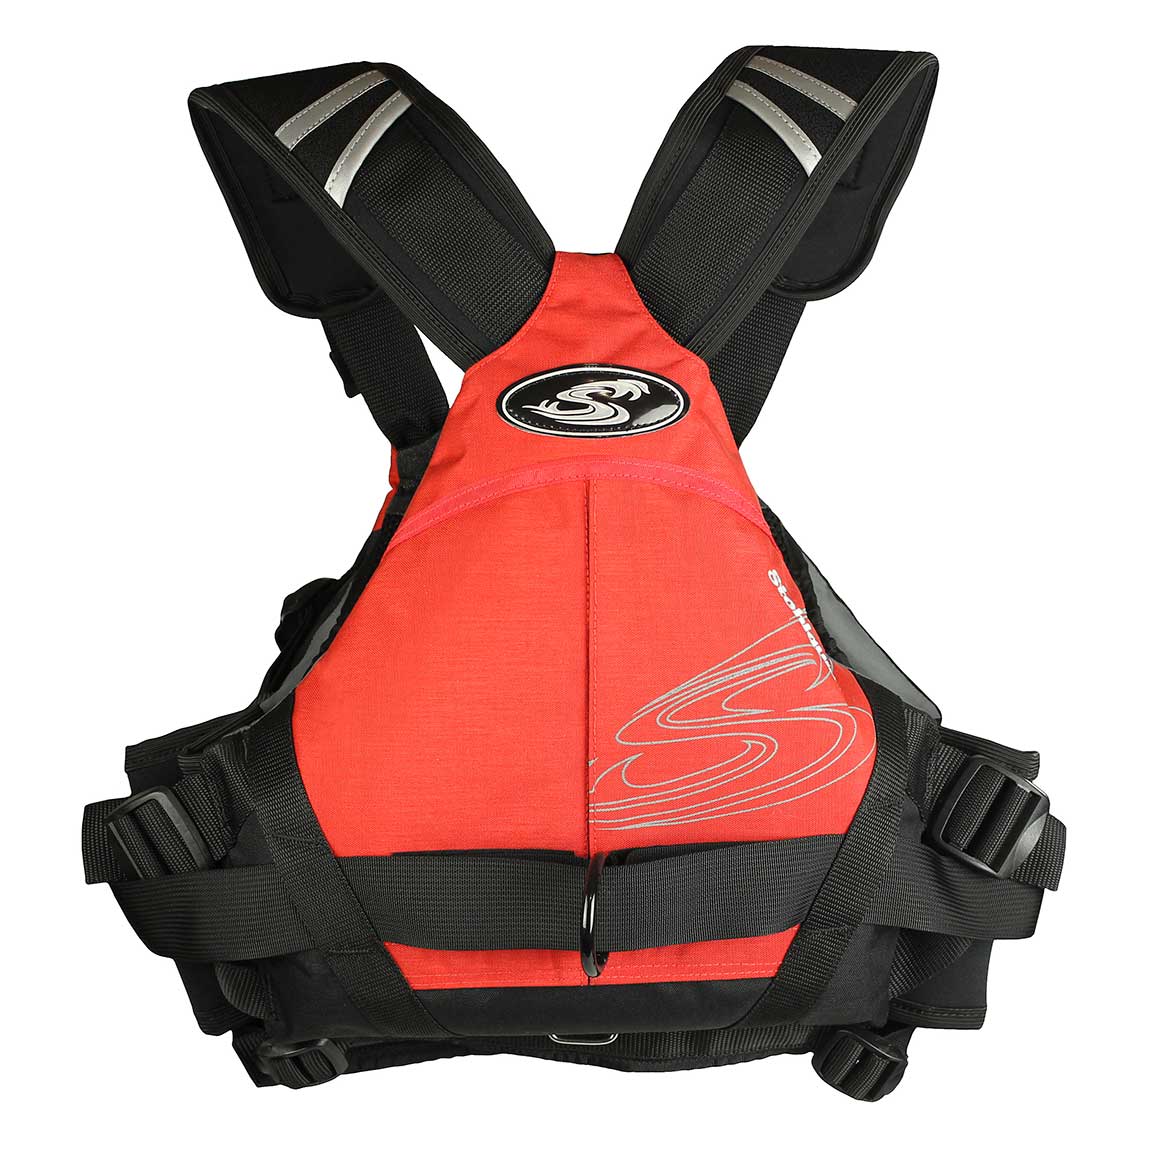 Stohlquist | Descent Whitewater Rescue PFD - 4Corners Riversports